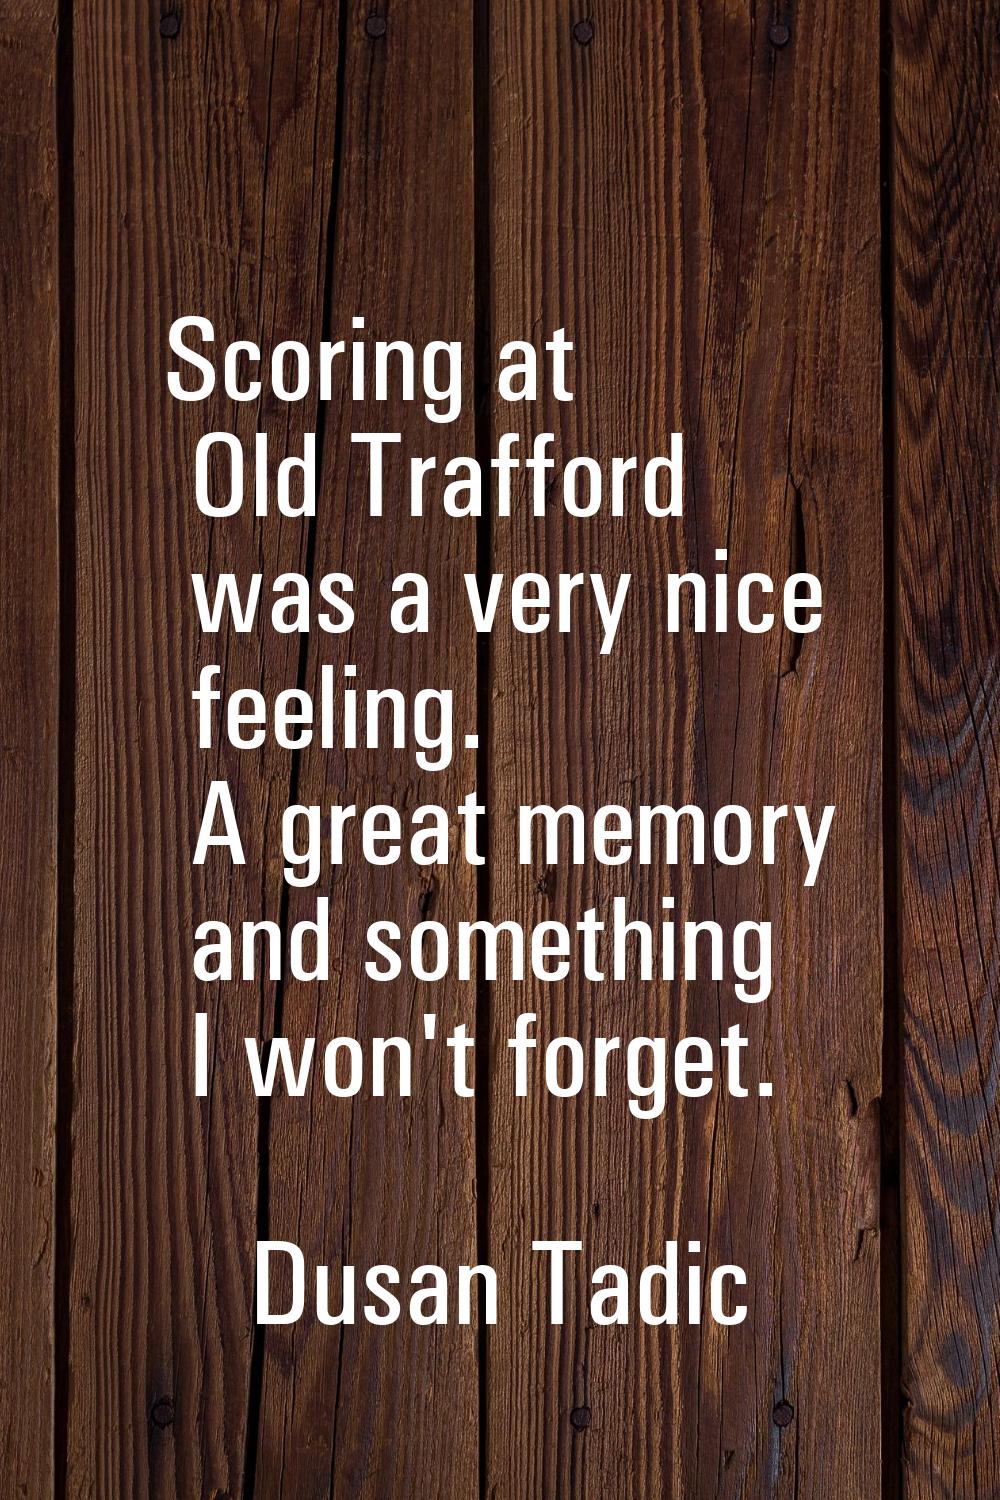 Scoring at Old Trafford was a very nice feeling. A great memory and something I won't forget.